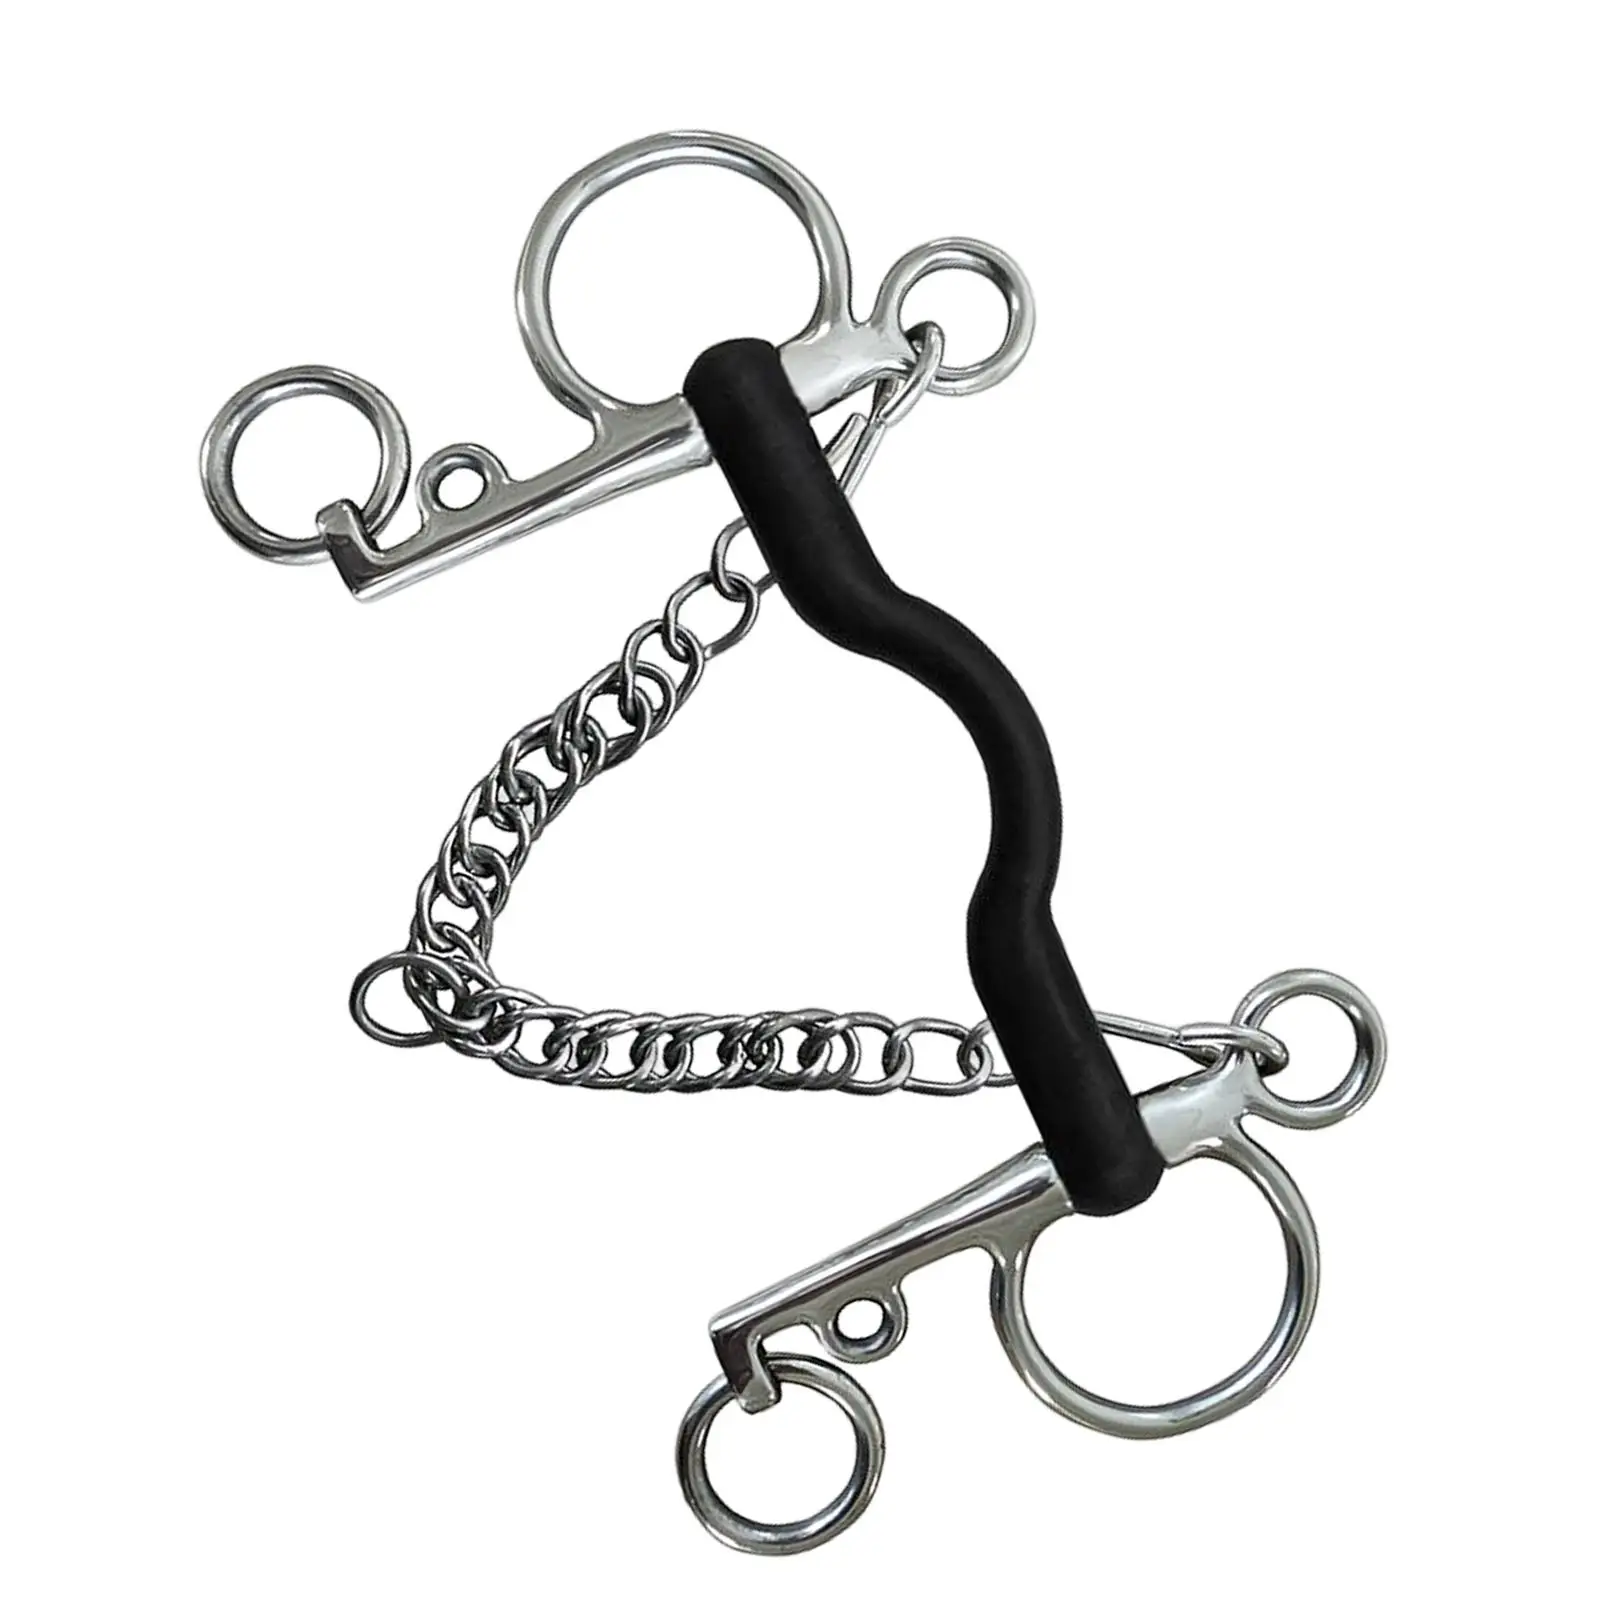 Durable Horse Bit W/Curb Hooks Chain Horse Gag Bit Stainless Steel with Silver